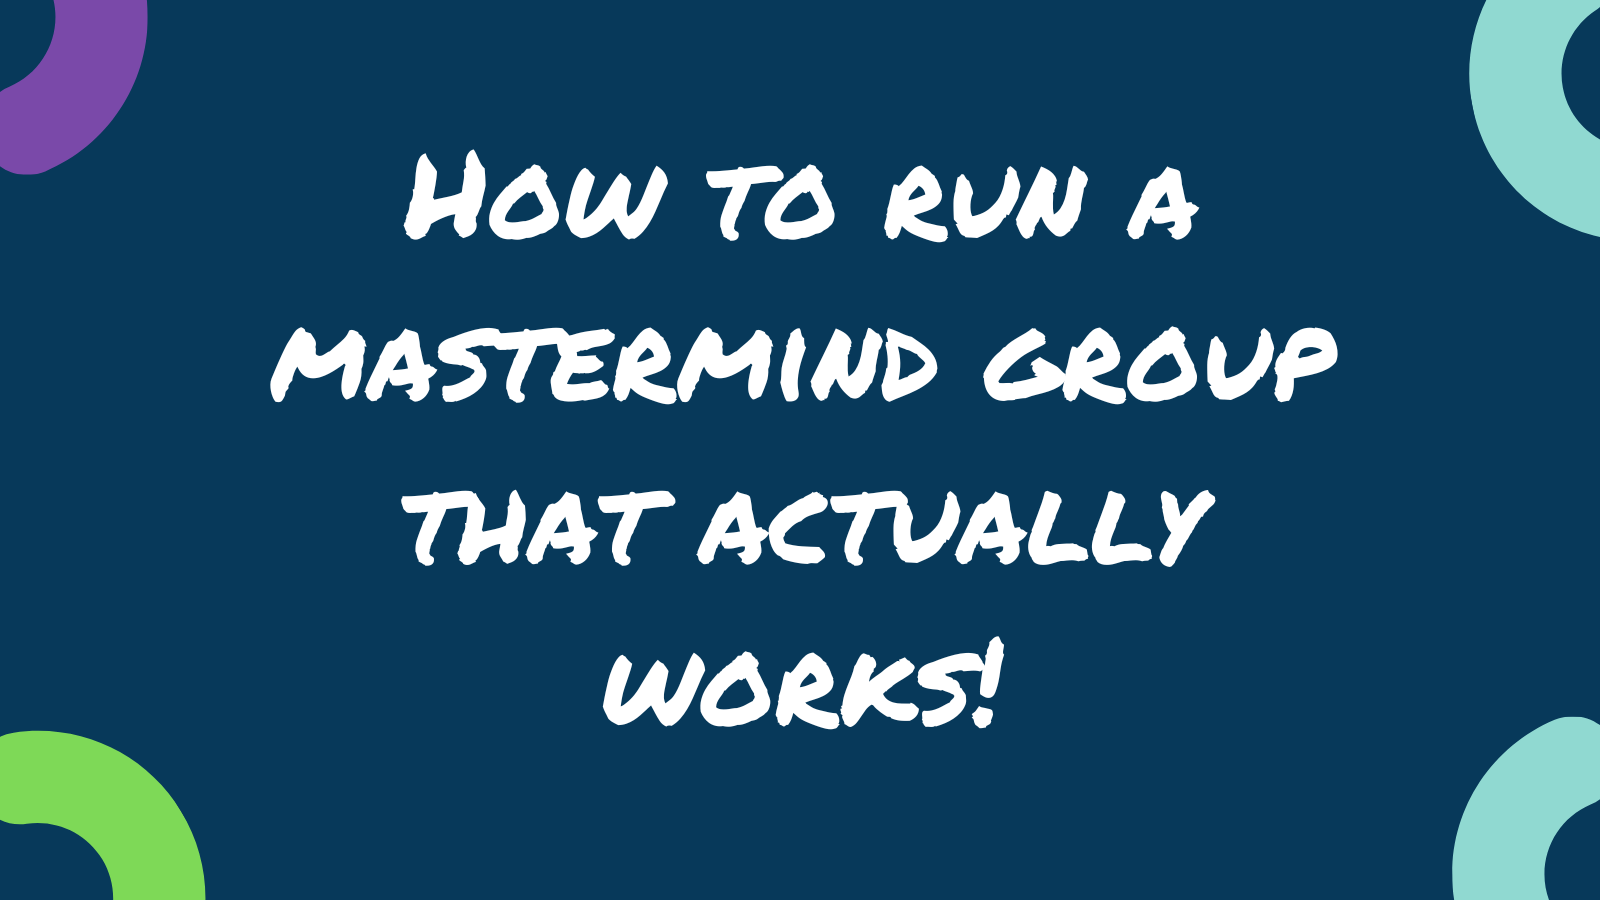 How to run a mastermind group that actually works!